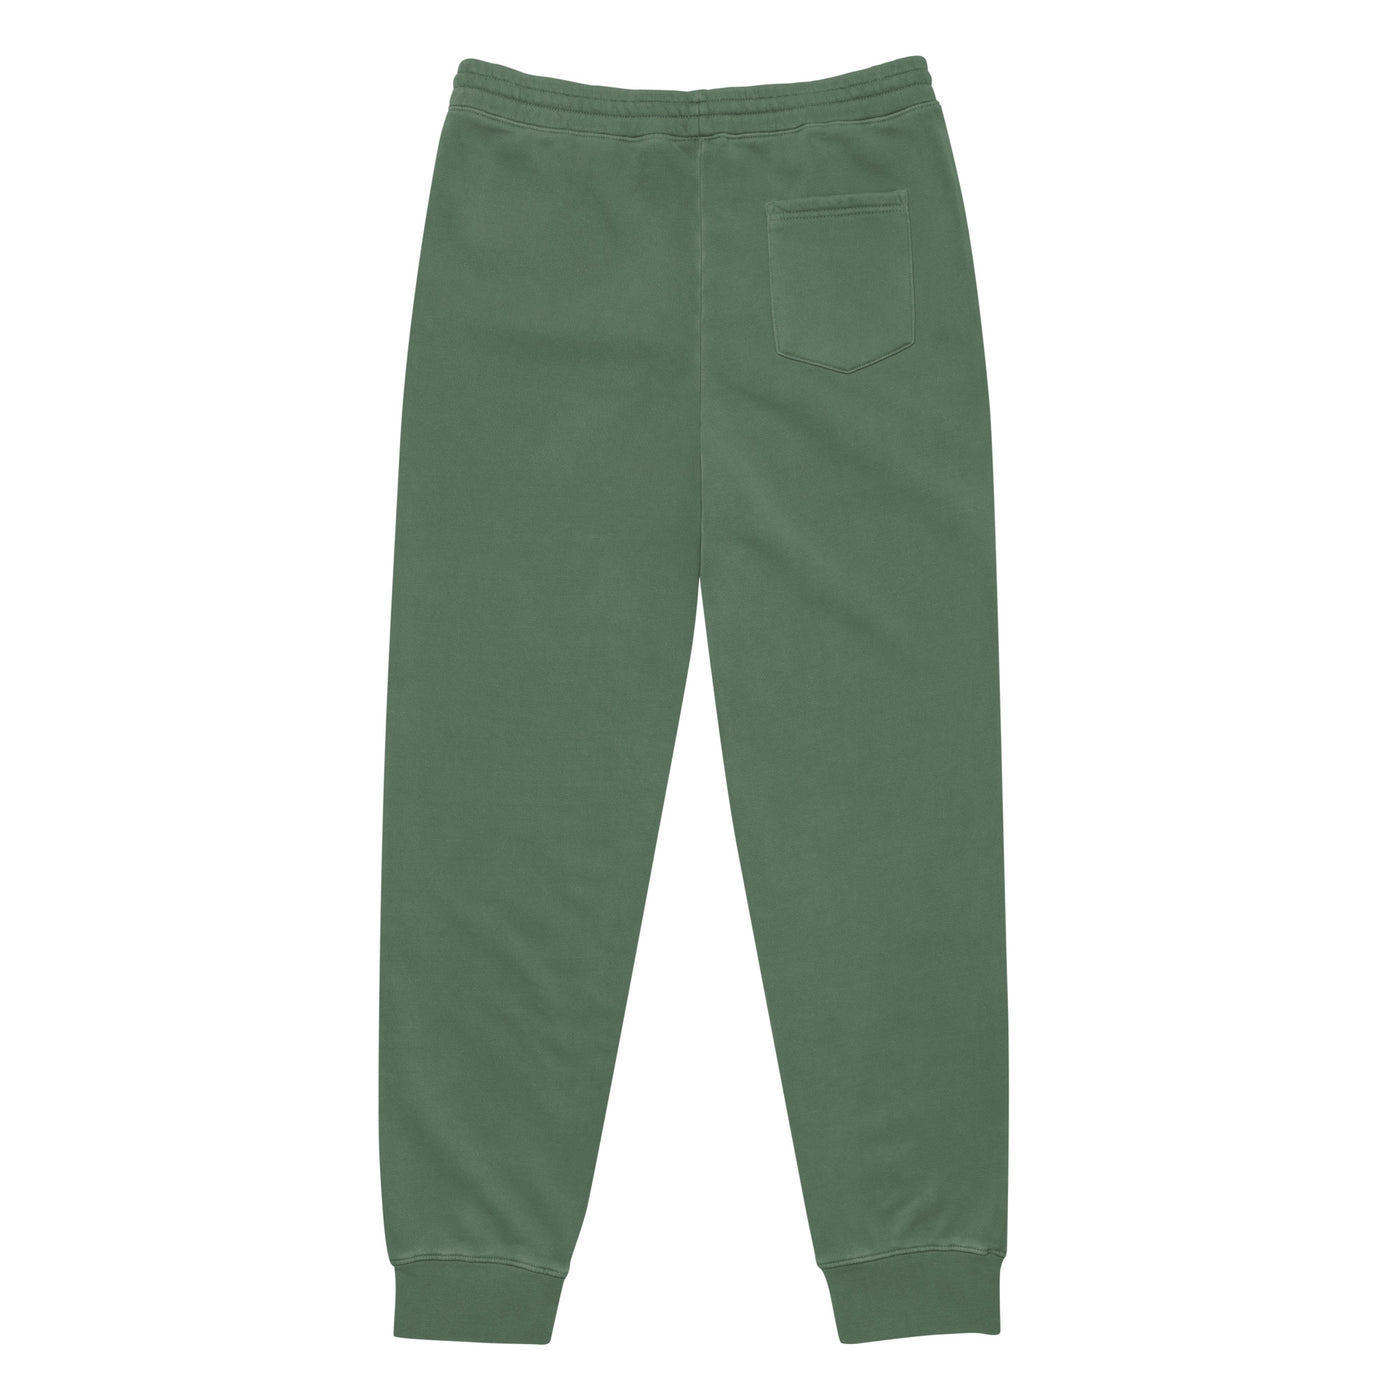 Men's Pigment-Dyed Alpine Green Sweatpants - Focus On What Is Right